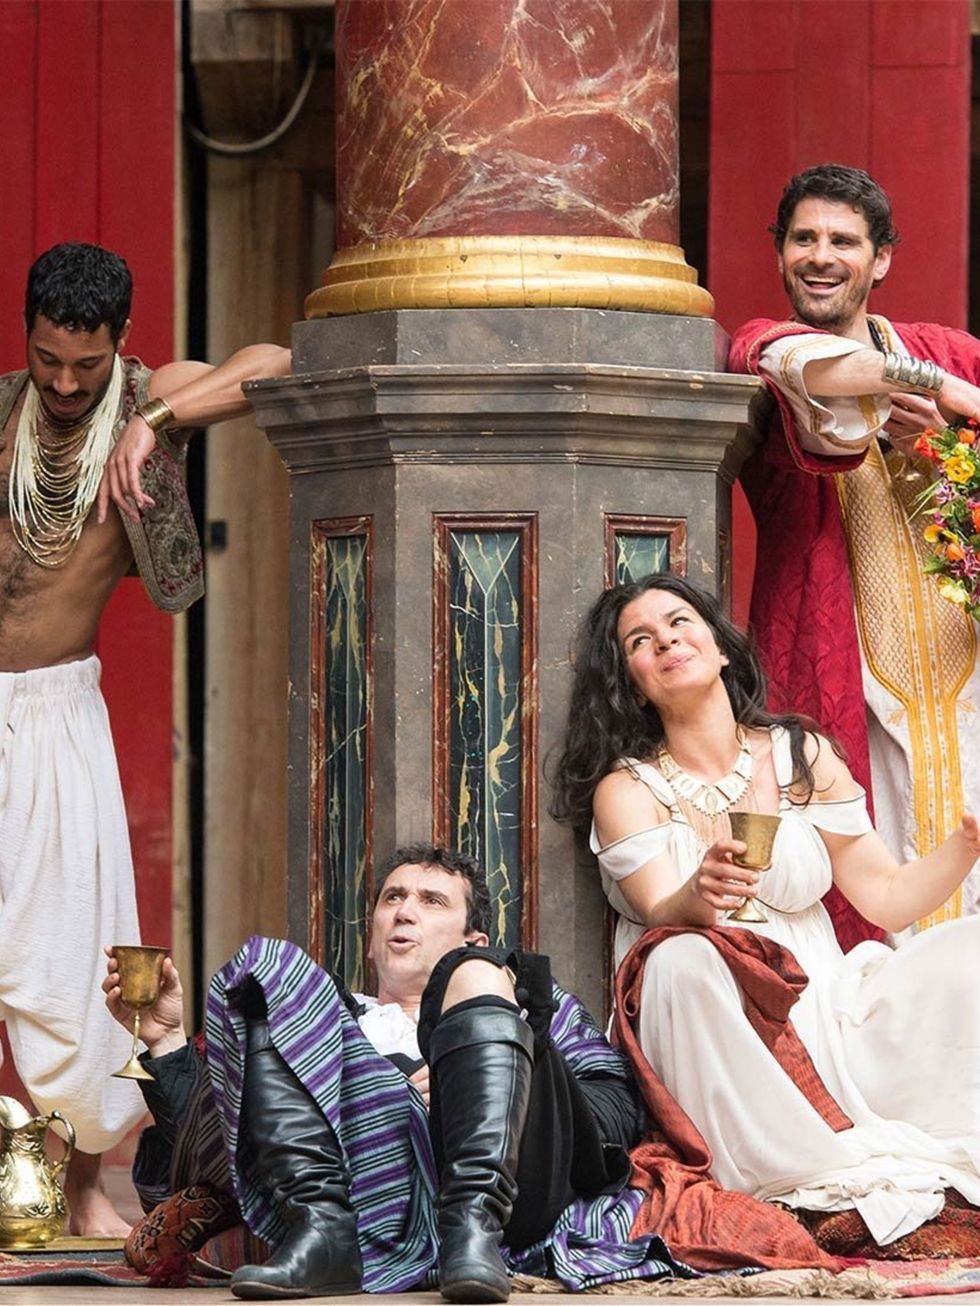 &lt;p&gt;&lt;strong&gt;THEATRE: Anthony &amp; Cleopatra &lt;/strong&gt;&lt;strong&gt; &lt;/strong&gt;&lt;strong&gt; &lt;/strong&gt;&lt;/p&gt;&lt;p&gt;Home of all things Shakespeare, the Globe Theatre will host &lt;em&gt;Anthony &amp; Cleopatra&lt;/em&gt;,